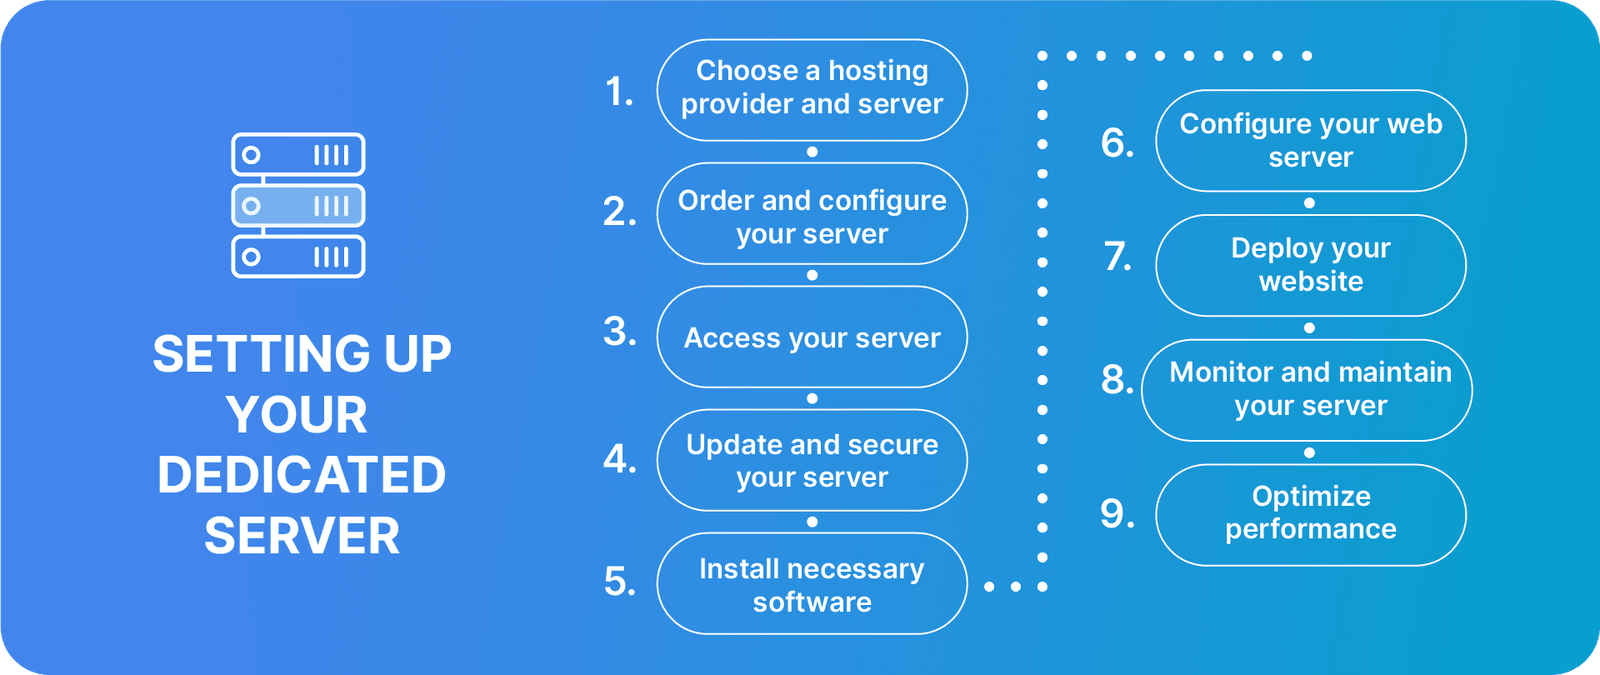 A high-level overview of setting up a dedicated server.